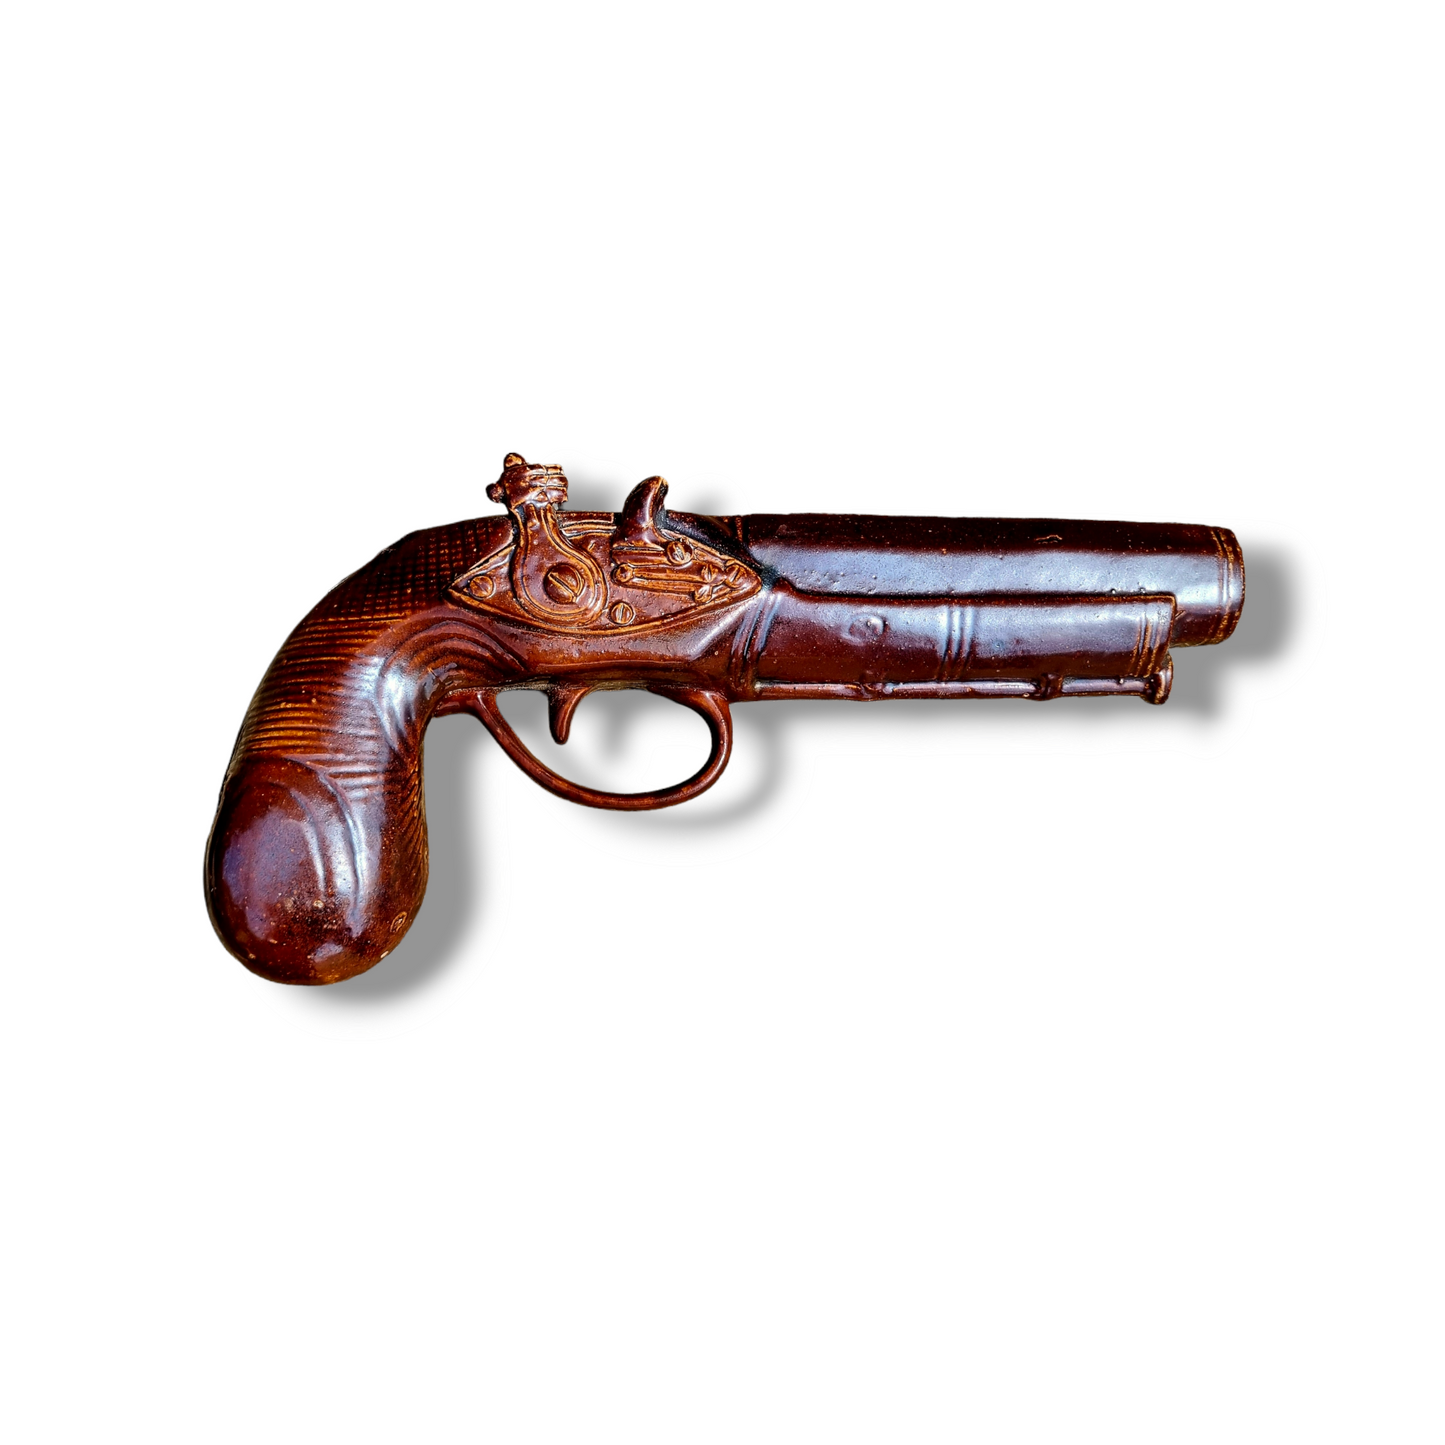 19th Century English Antique Salt-glazed Stoneware Pottery Pistol-Shaped Whisky Flask by Stephen Green, Imperial Potteries, Lambeth, London, Circa 1831-1858